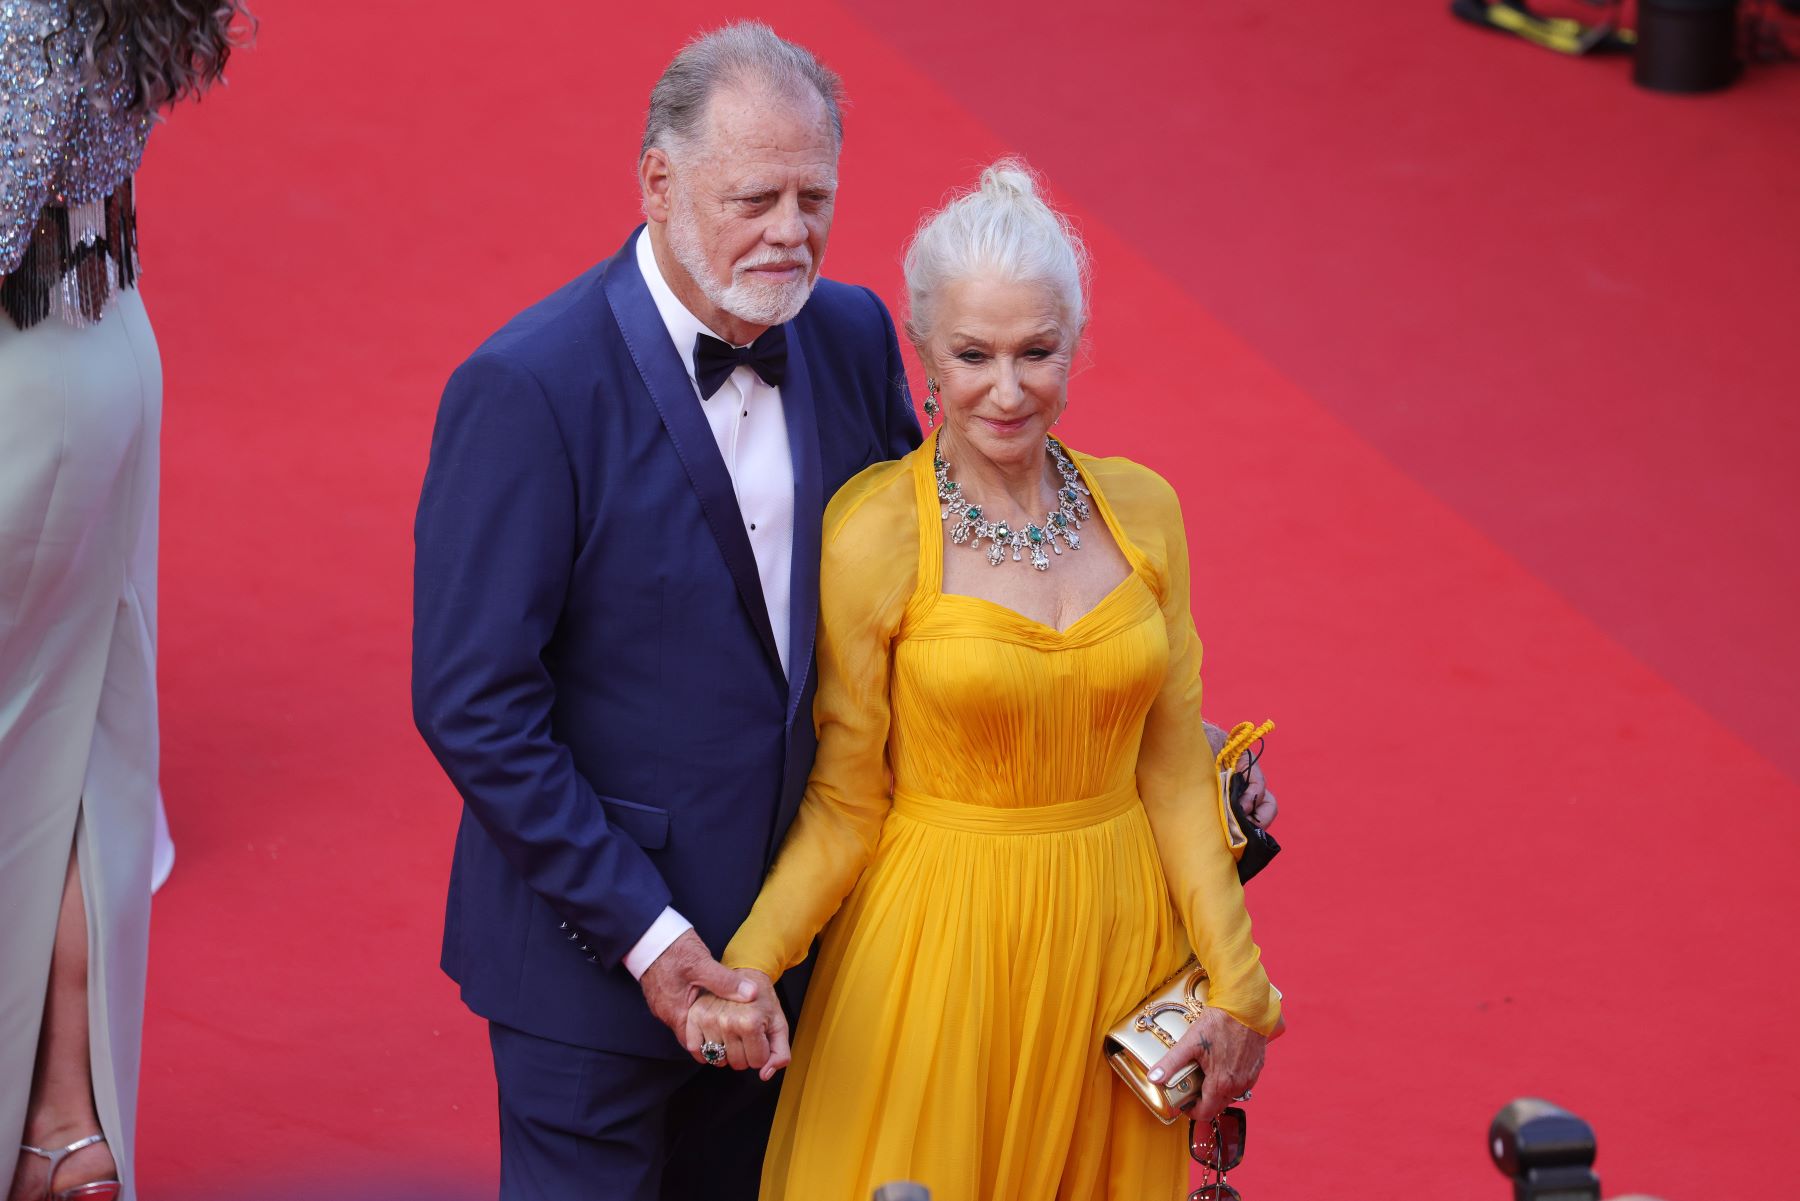 Helen Mirren and her husband Taylor Hackford at a screening of 'Annette' at the 74th annual Cannes Film Festival